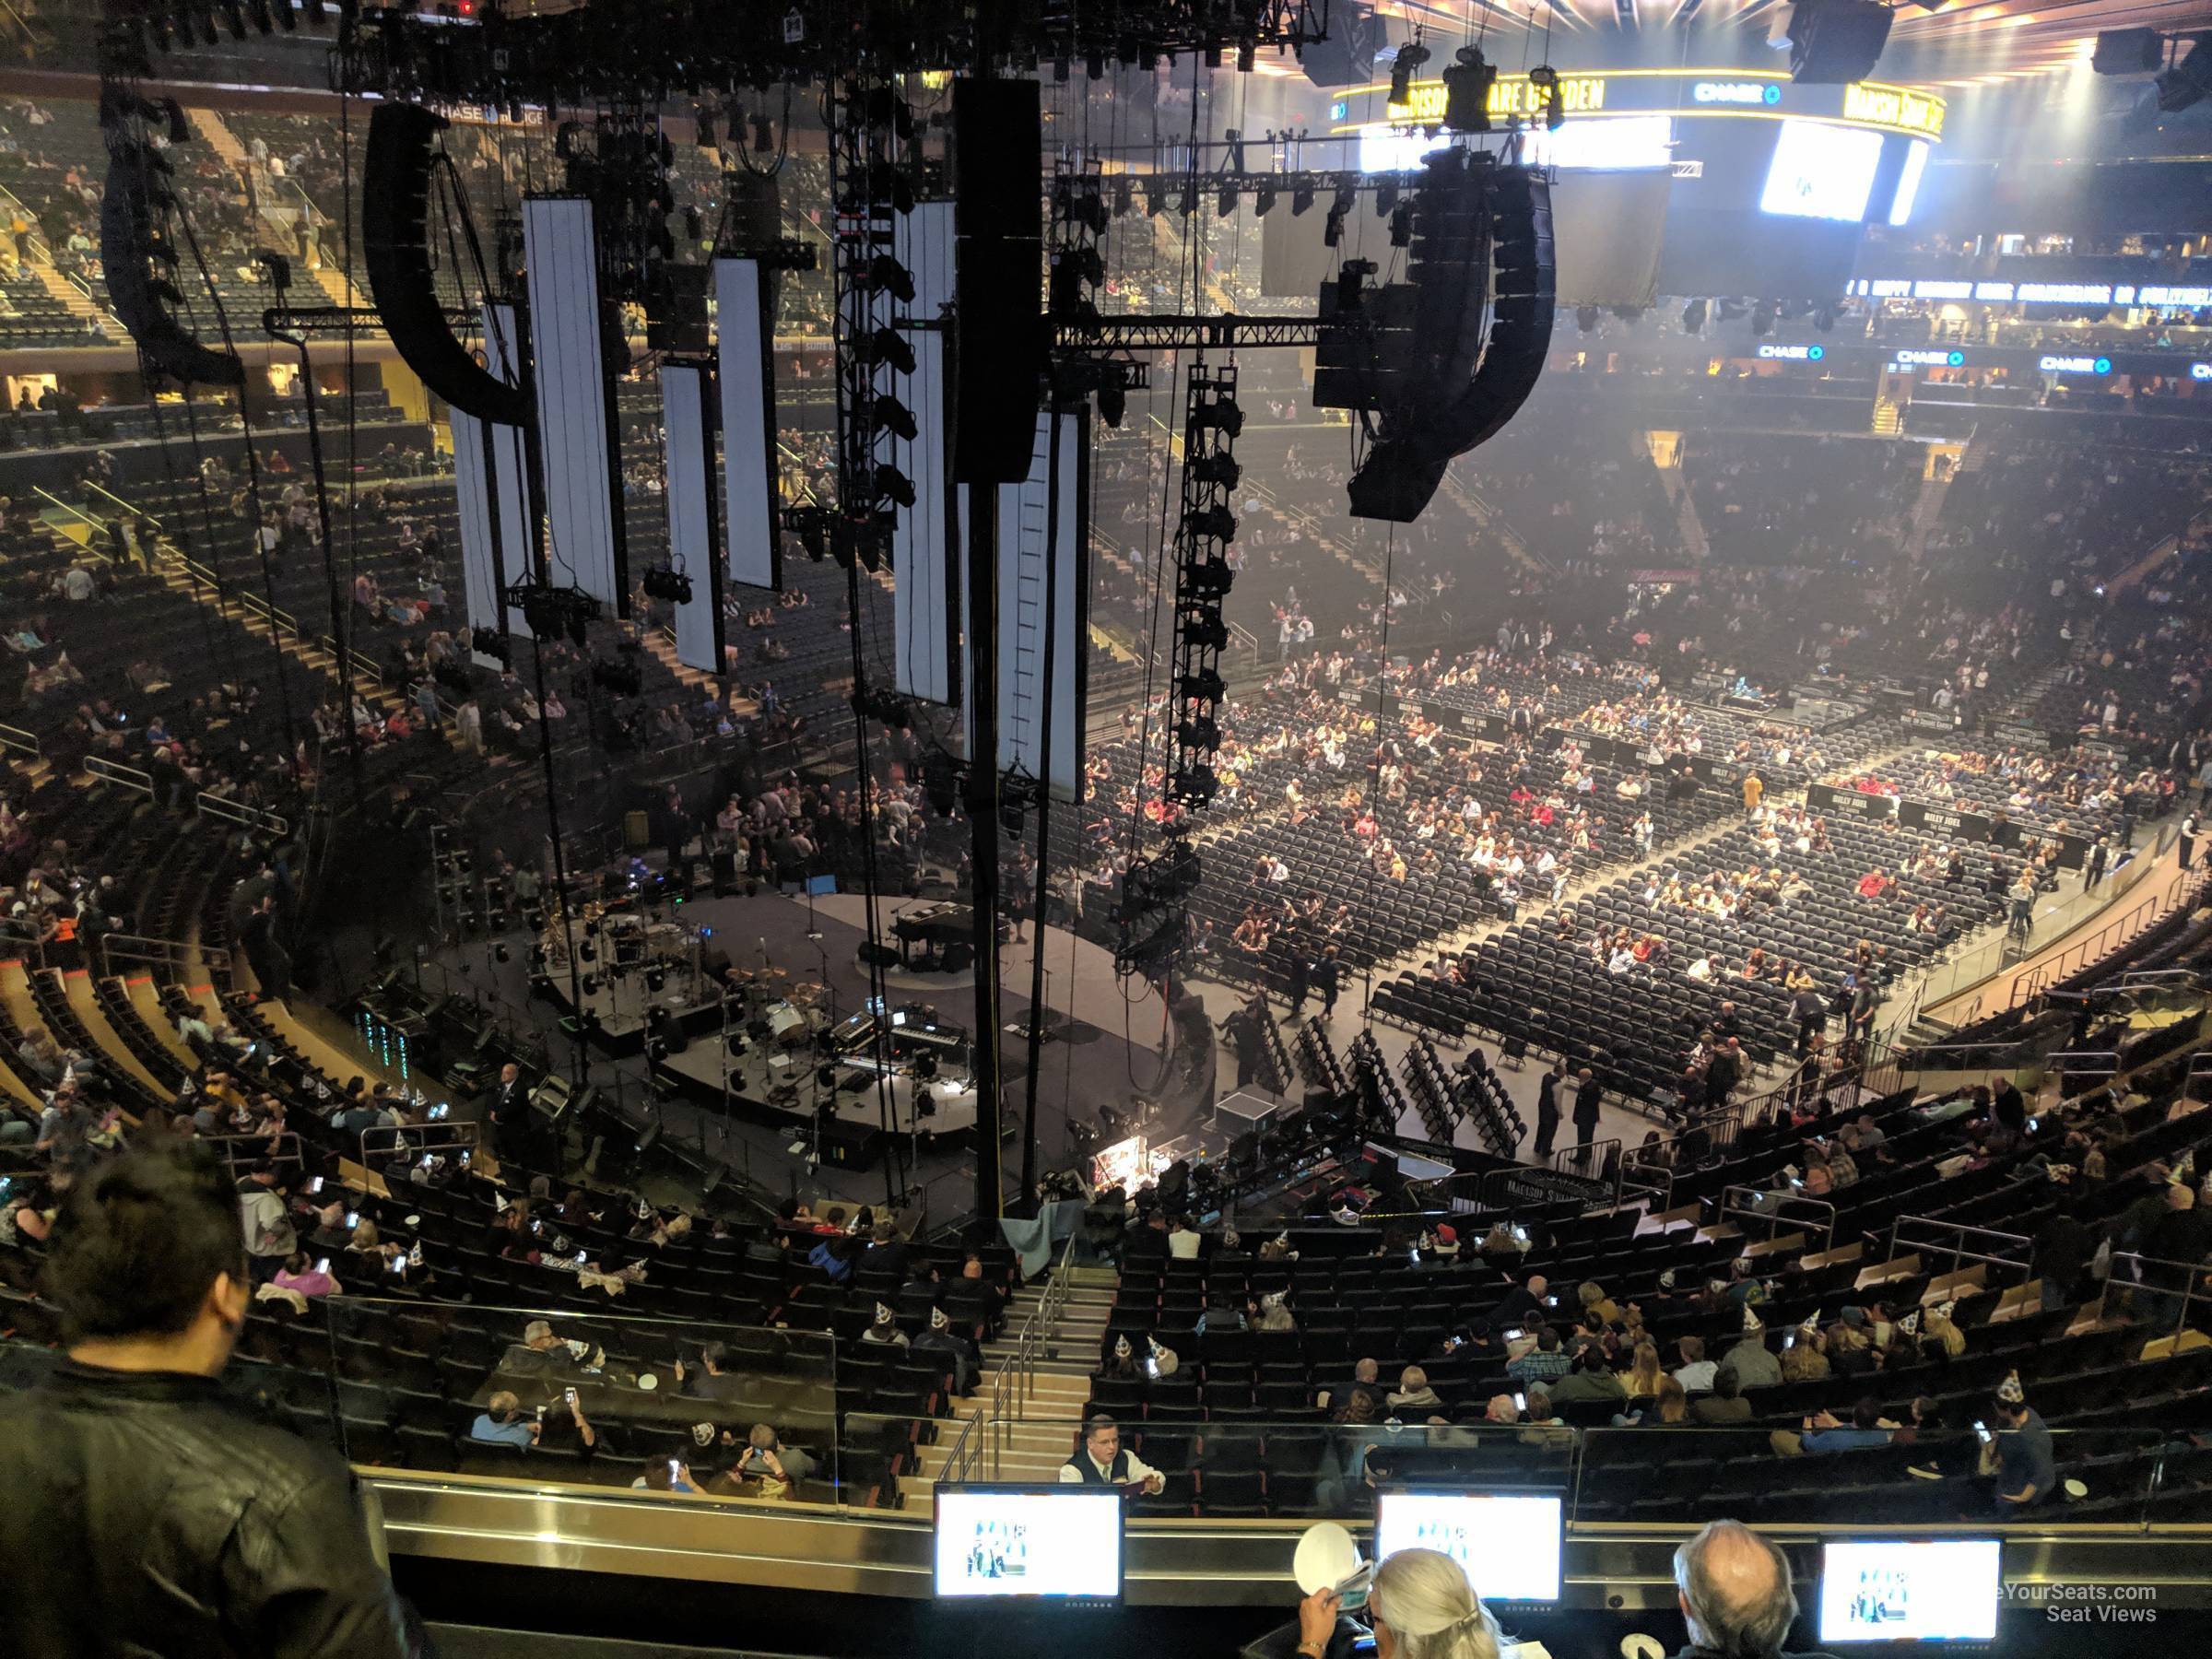 Madison Square Garden Section 220 Concert Seating ...